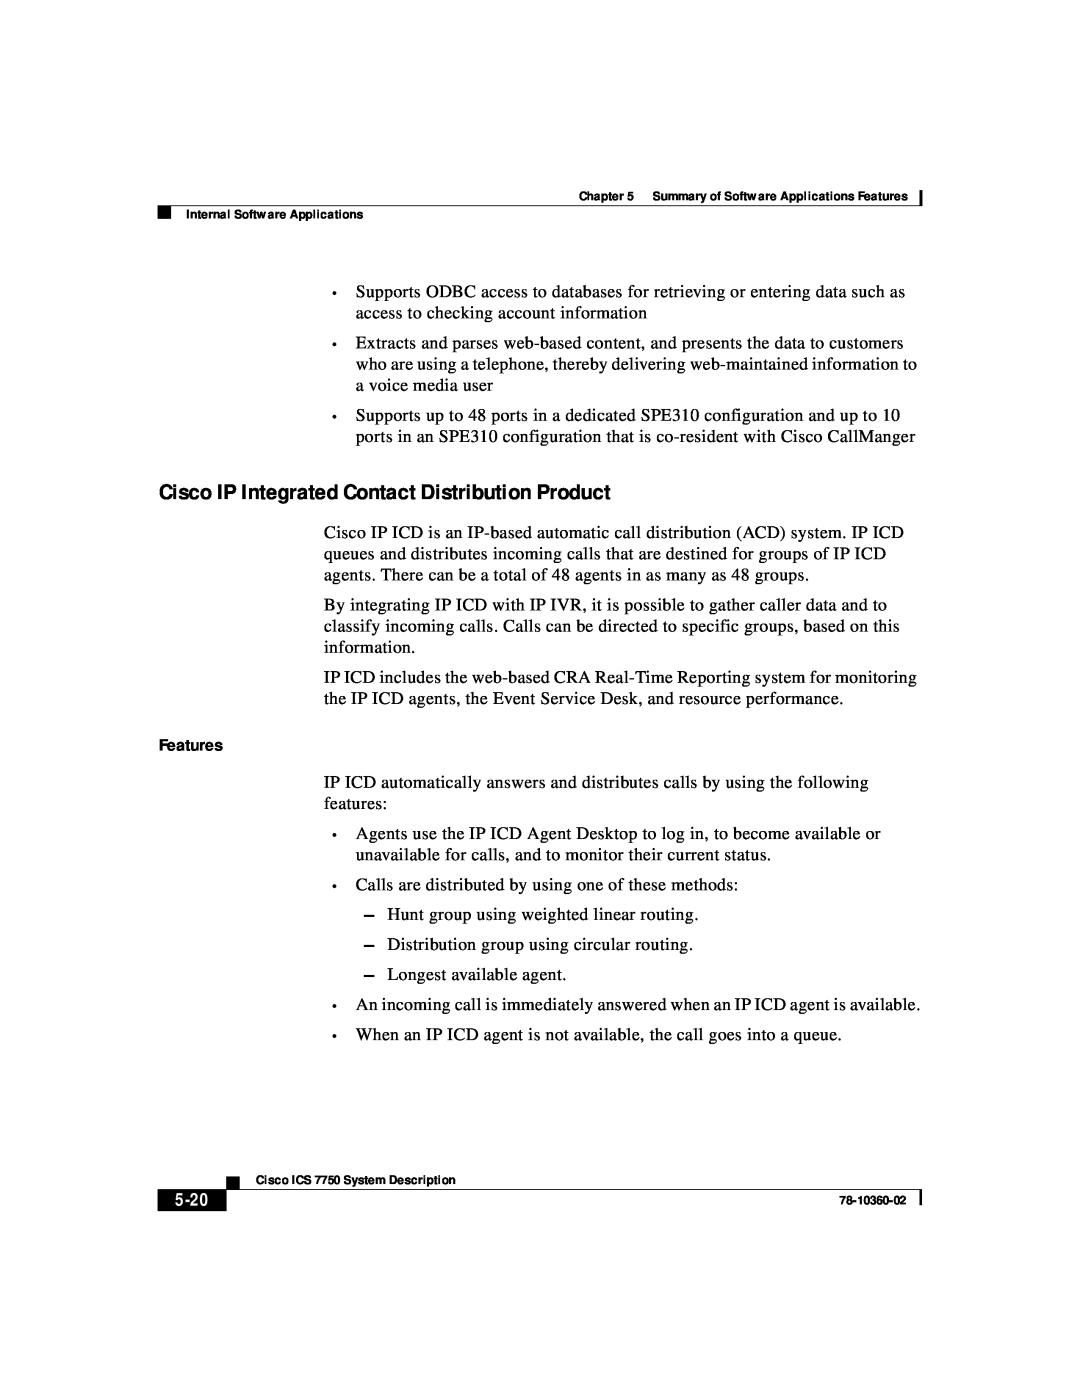 Cisco Systems ICS-7750 manual Cisco IP Integrated Contact Distribution Product, Features, 5-20 